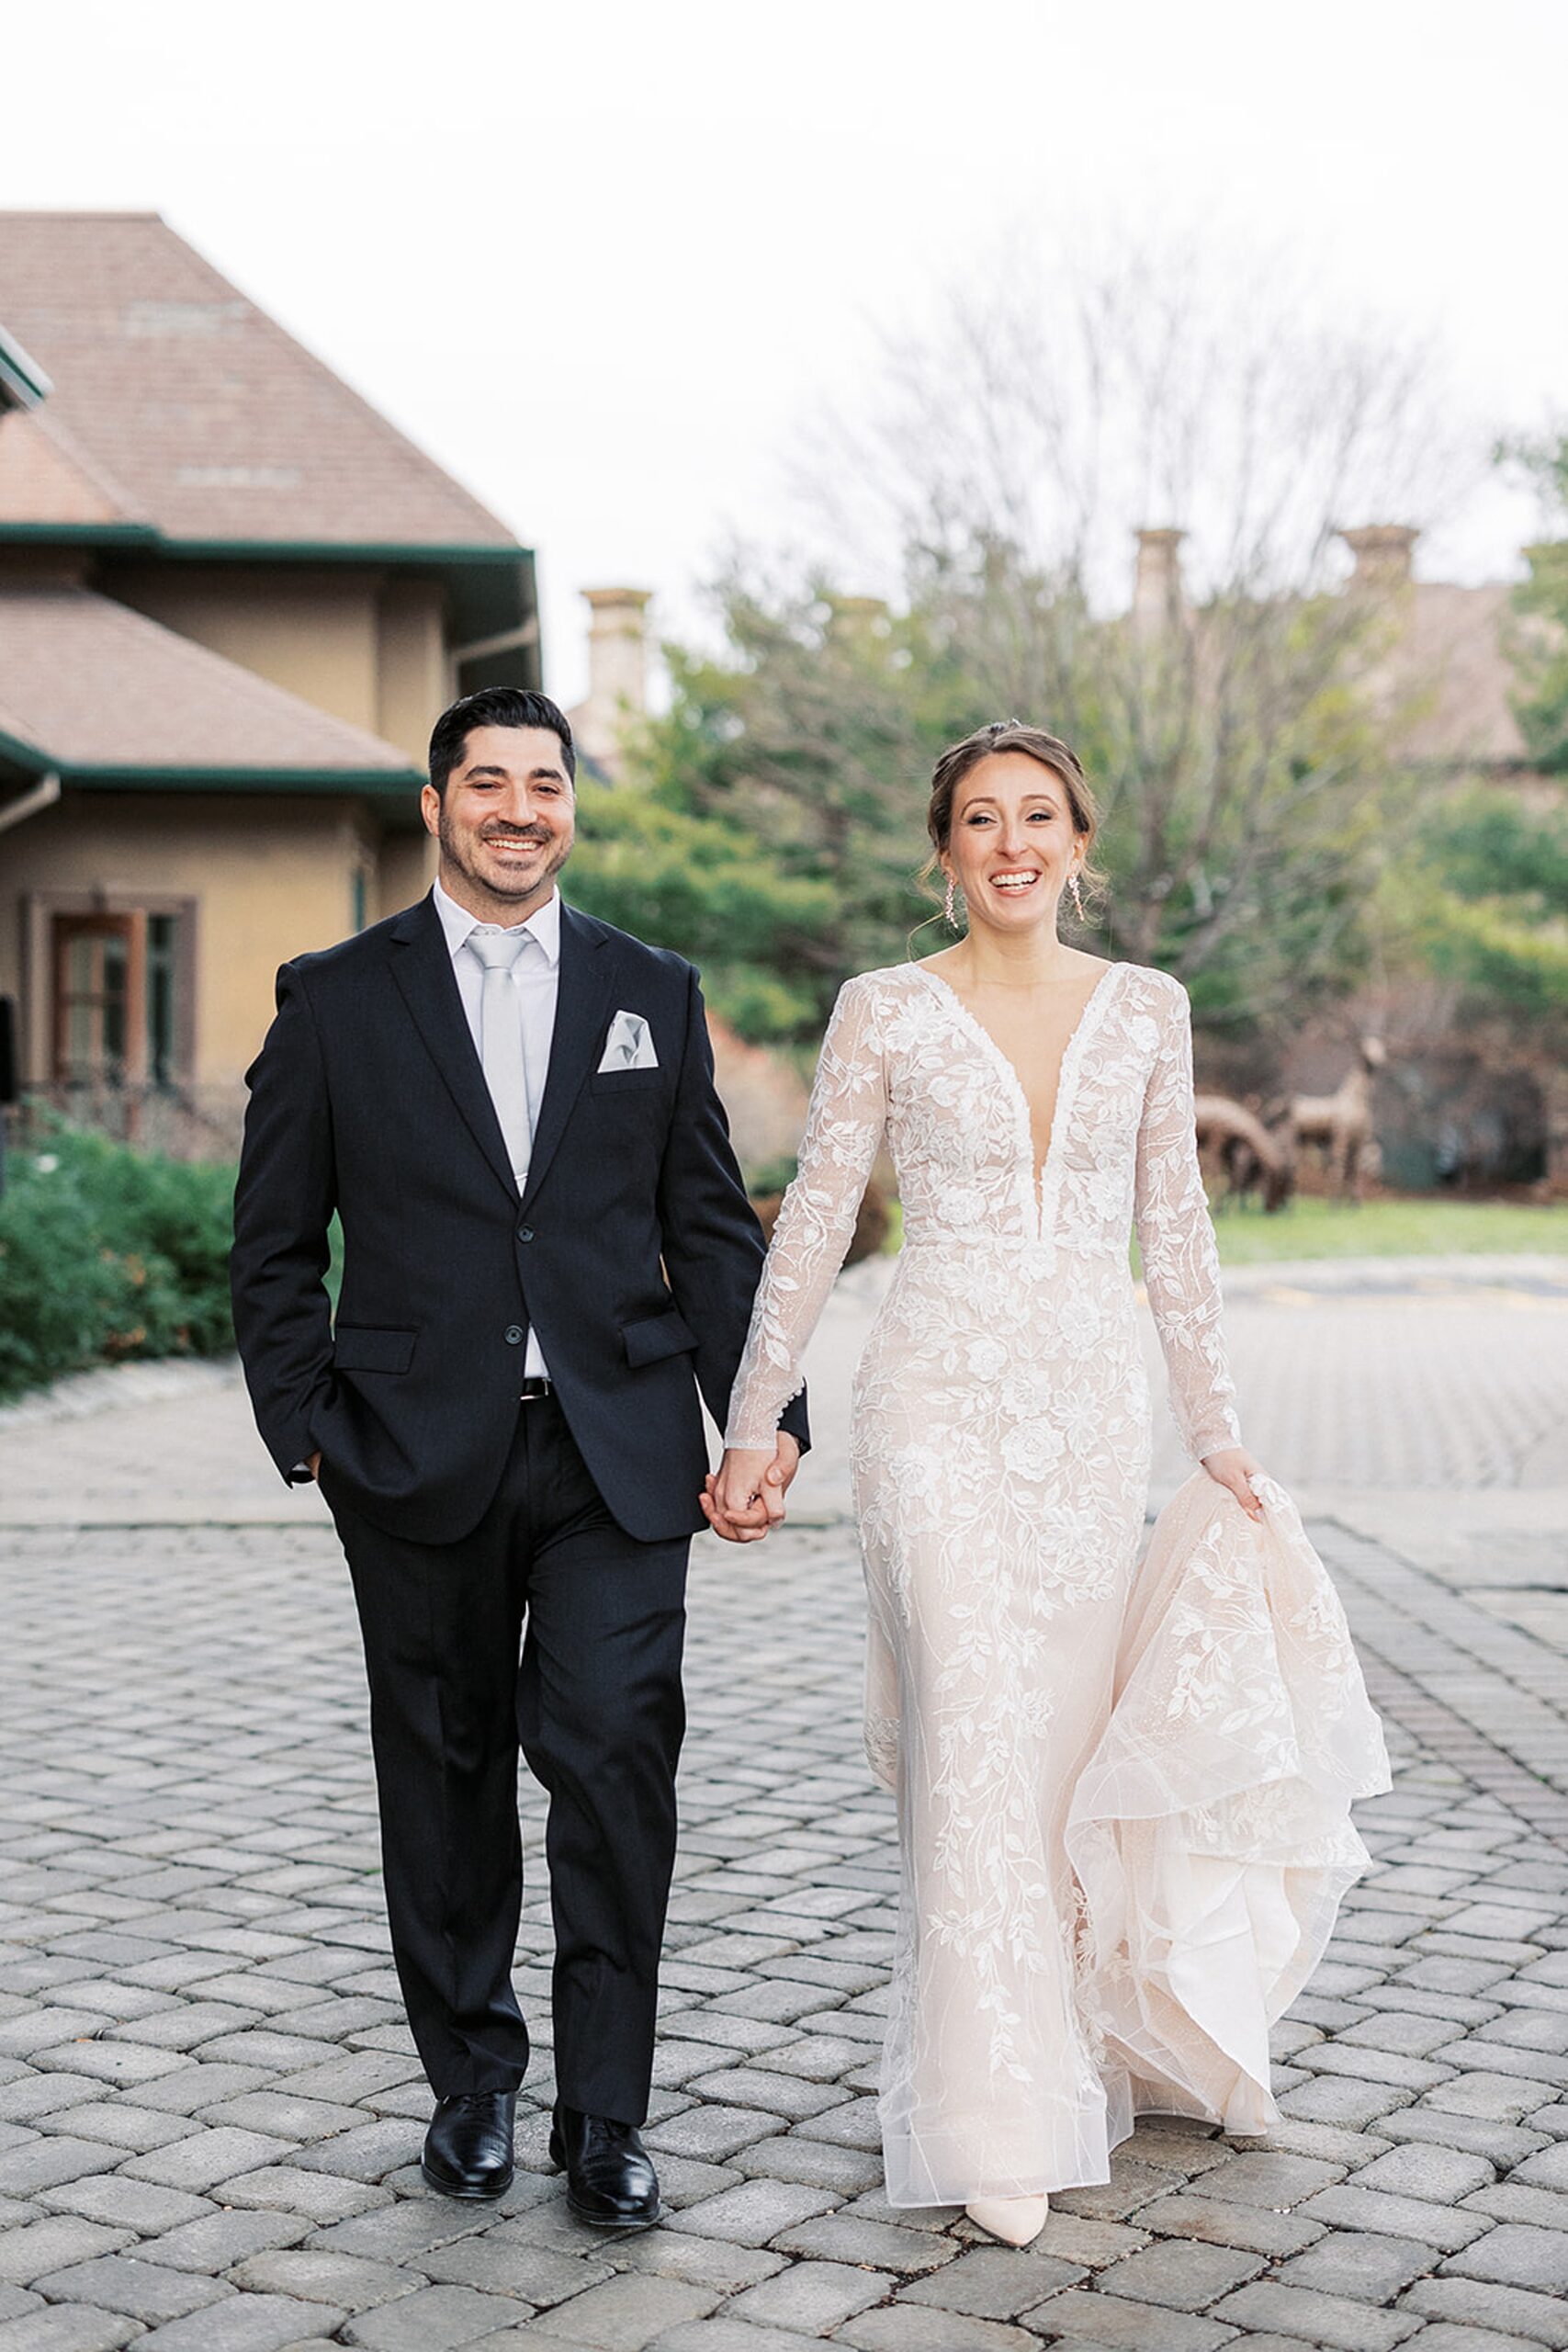 Newlyweds walk through a stone patio holding hands